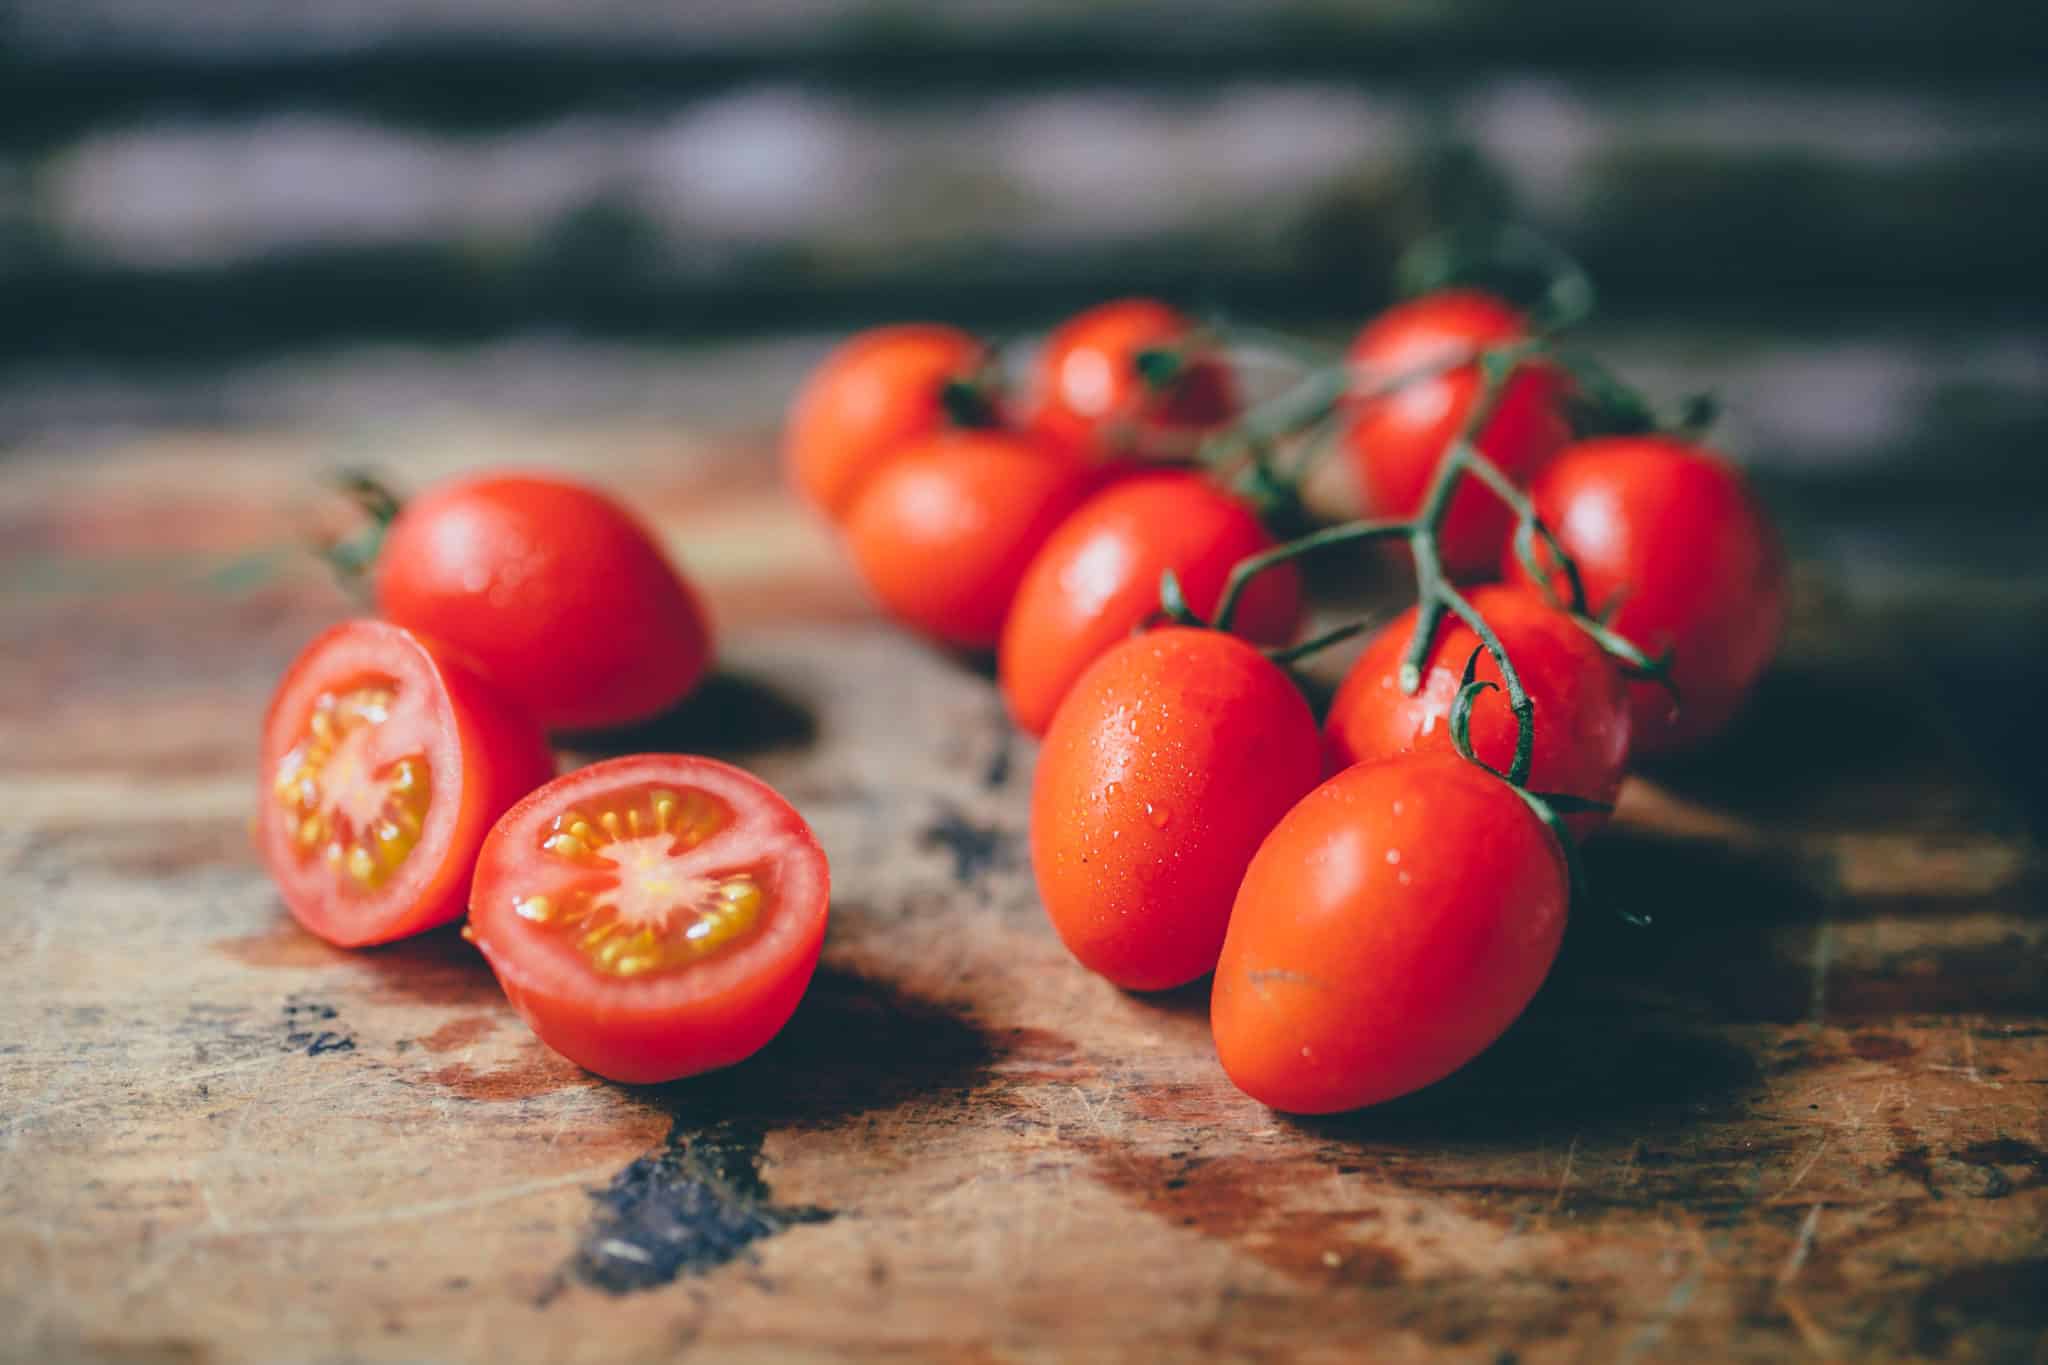 Cherry tomatoes for improved mood